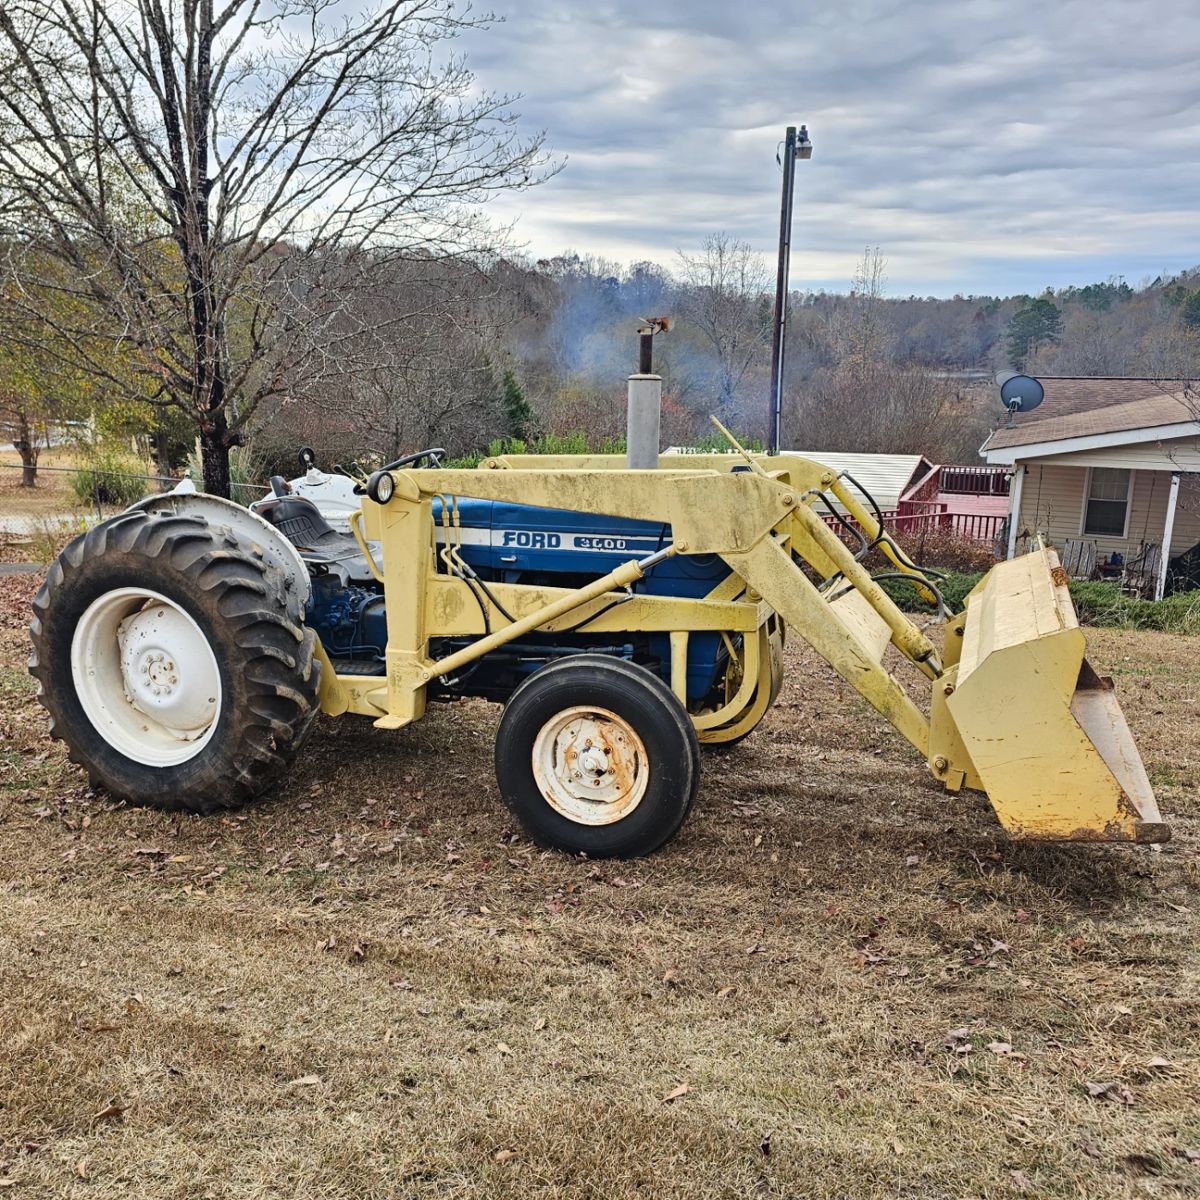 Ford 3600 Diesel Tractor With Loader 2196 hours